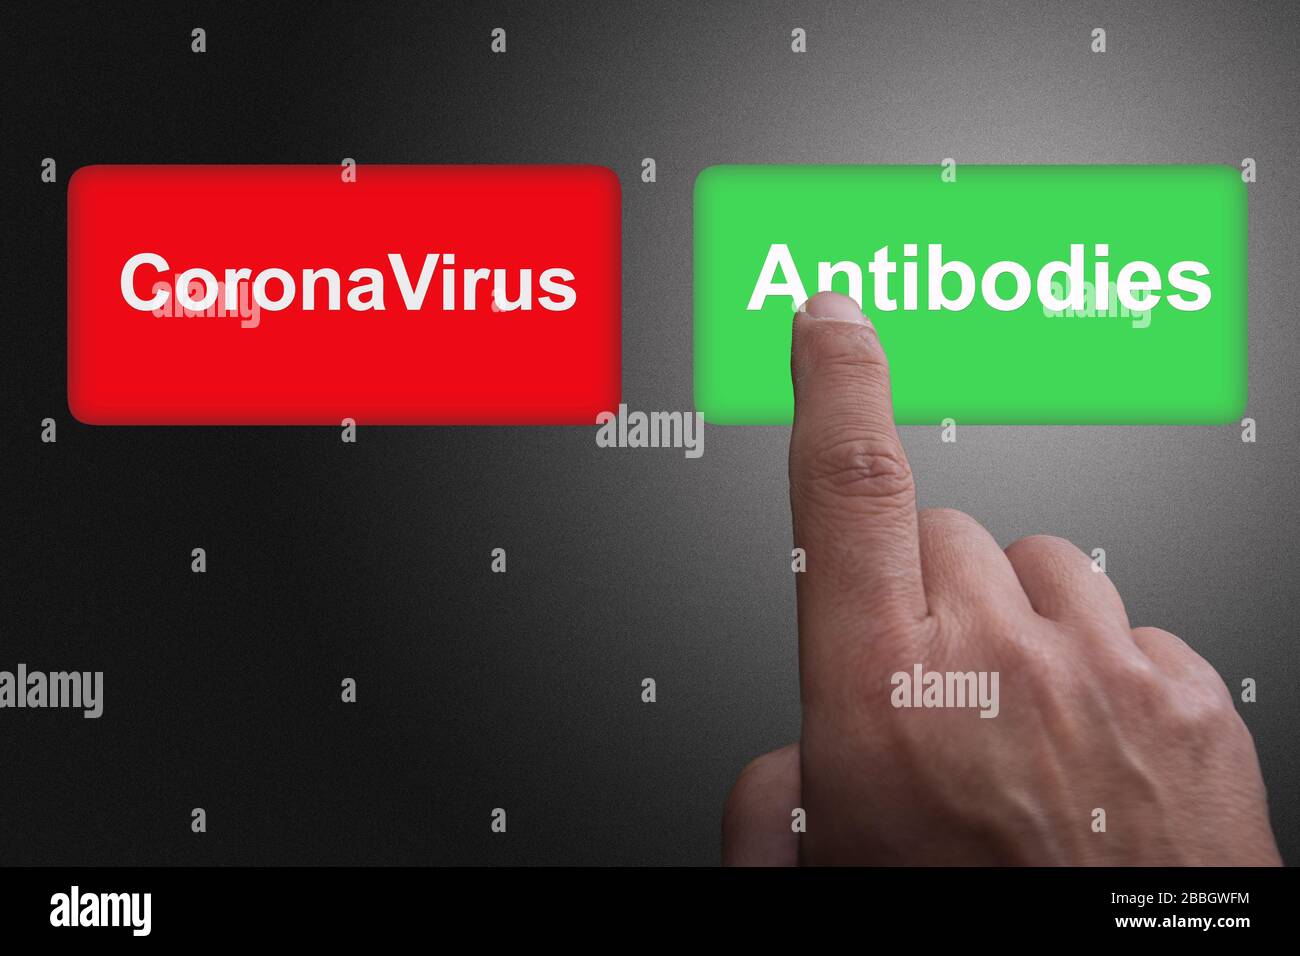 COVID-19 Virus Vaccine discovery or antibodies research success concept, Red and green buttons with Coronavirus and antibodies text Stock Photo